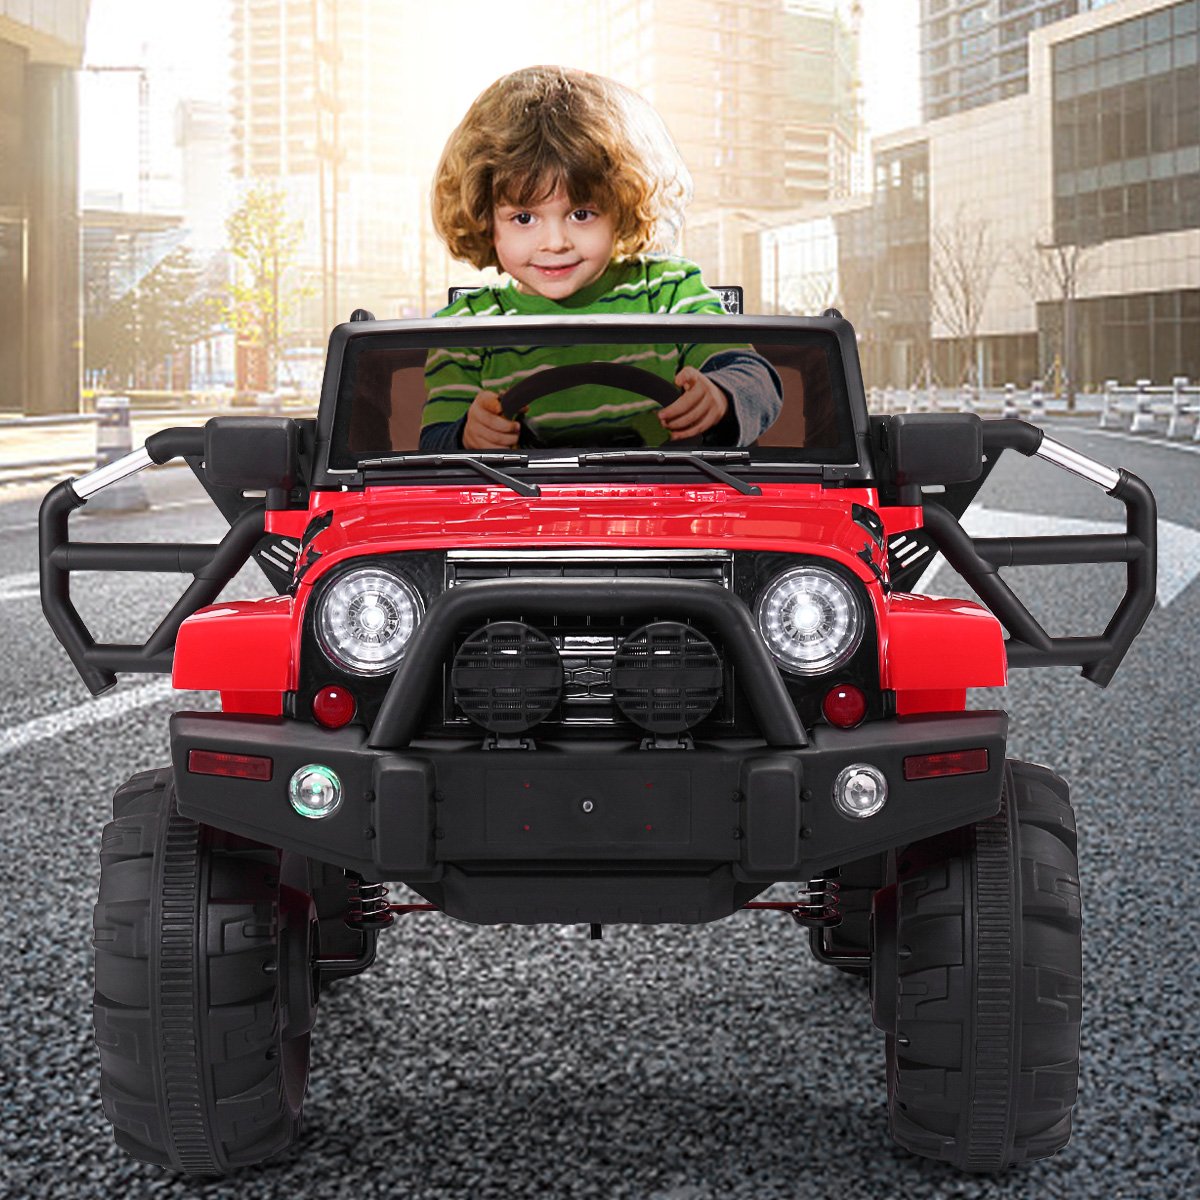 shouw the great electric cars for kids